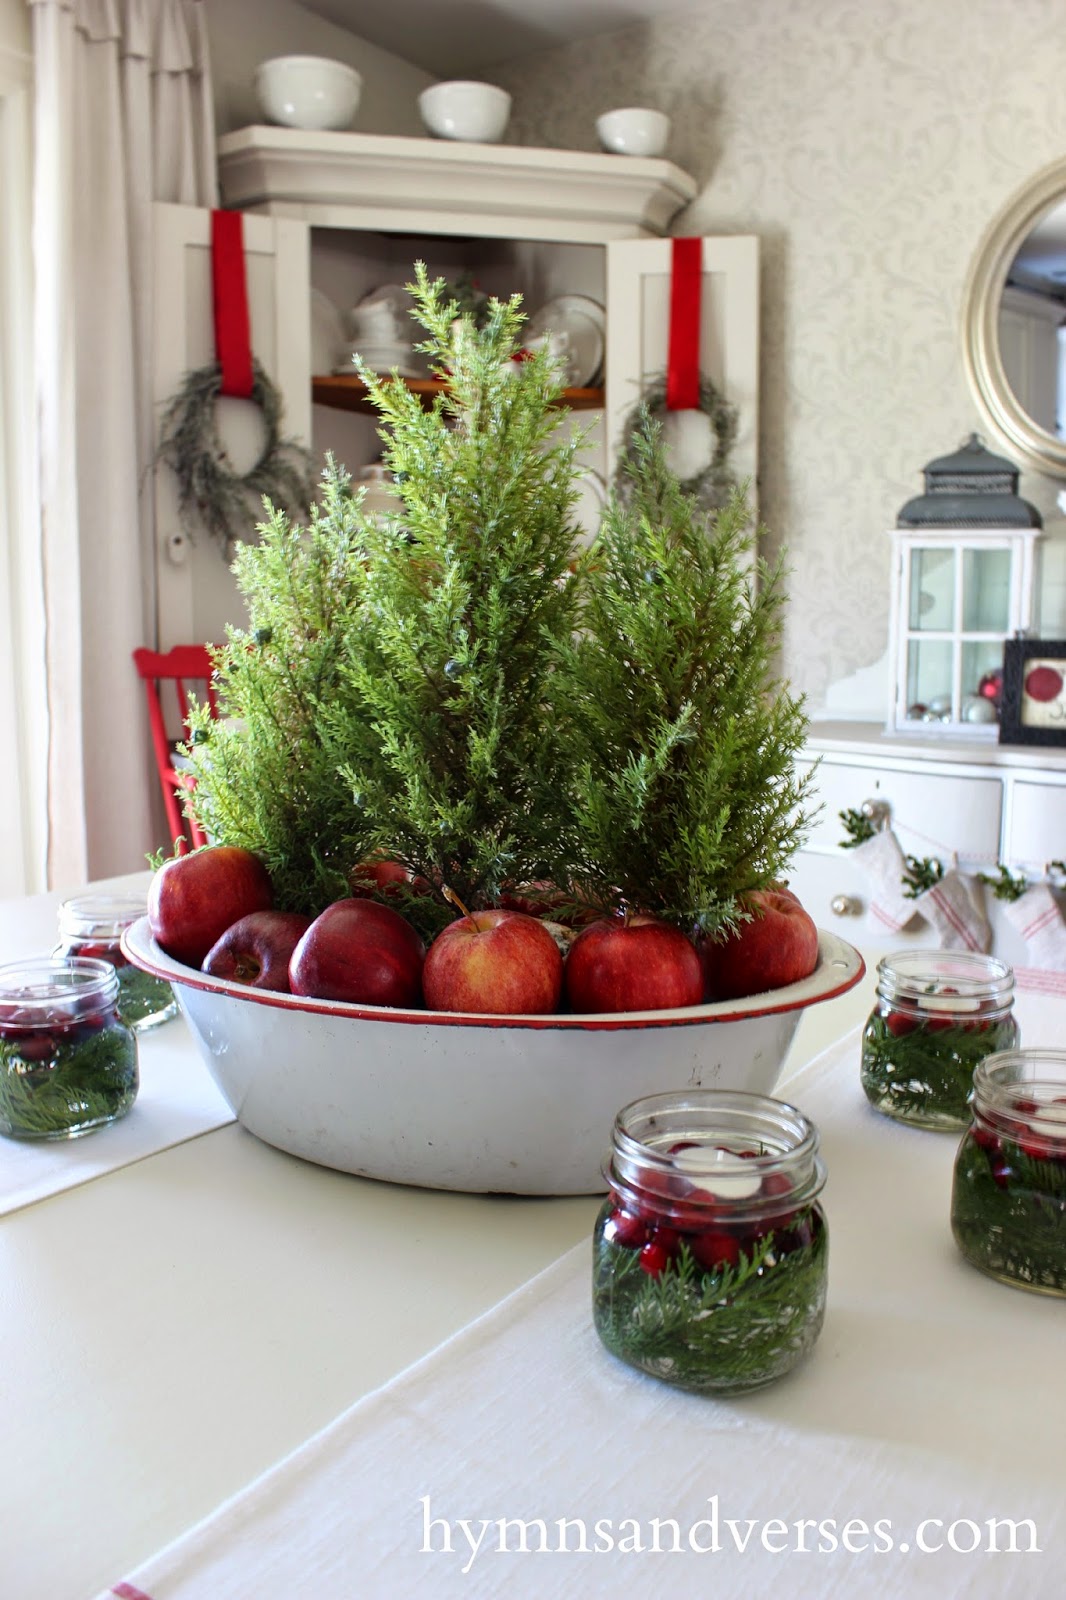 Christmas table centerpieces